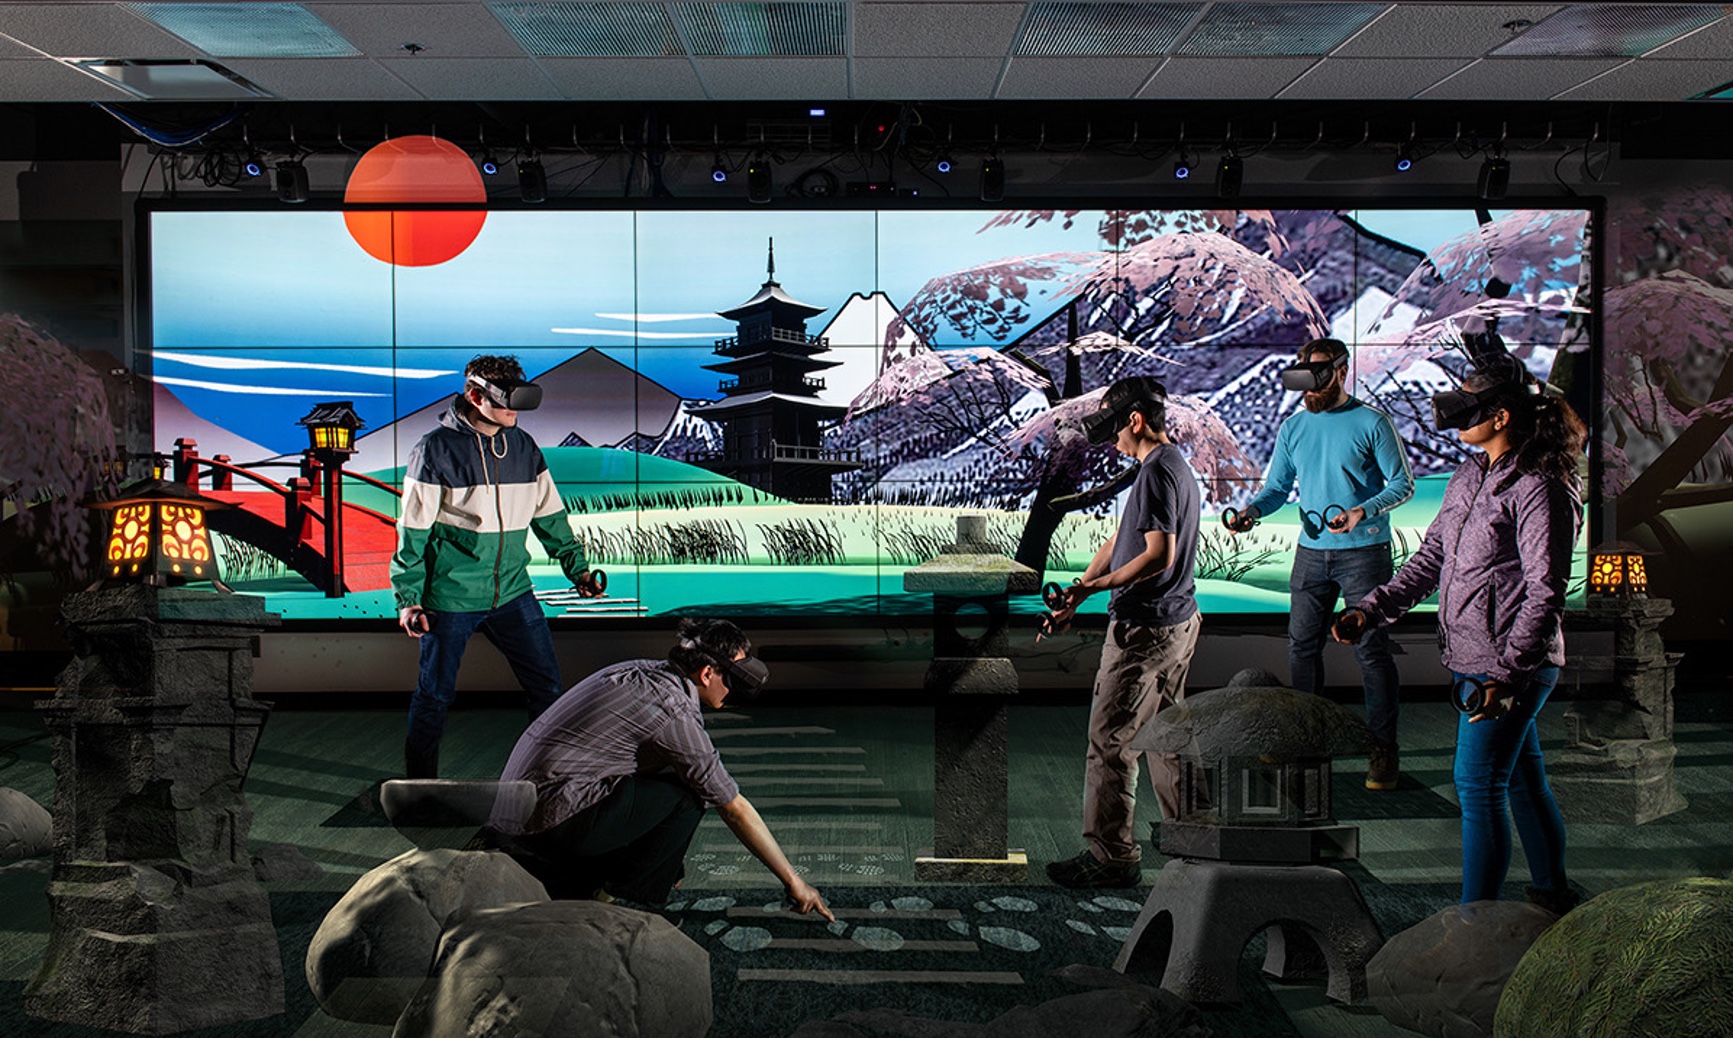 There are 5 people depicted in Virtual Reality head sets. Behind them is a large screen showing a Japanese cherry orchard, a red sun, a bridge and snow-capped mountains.